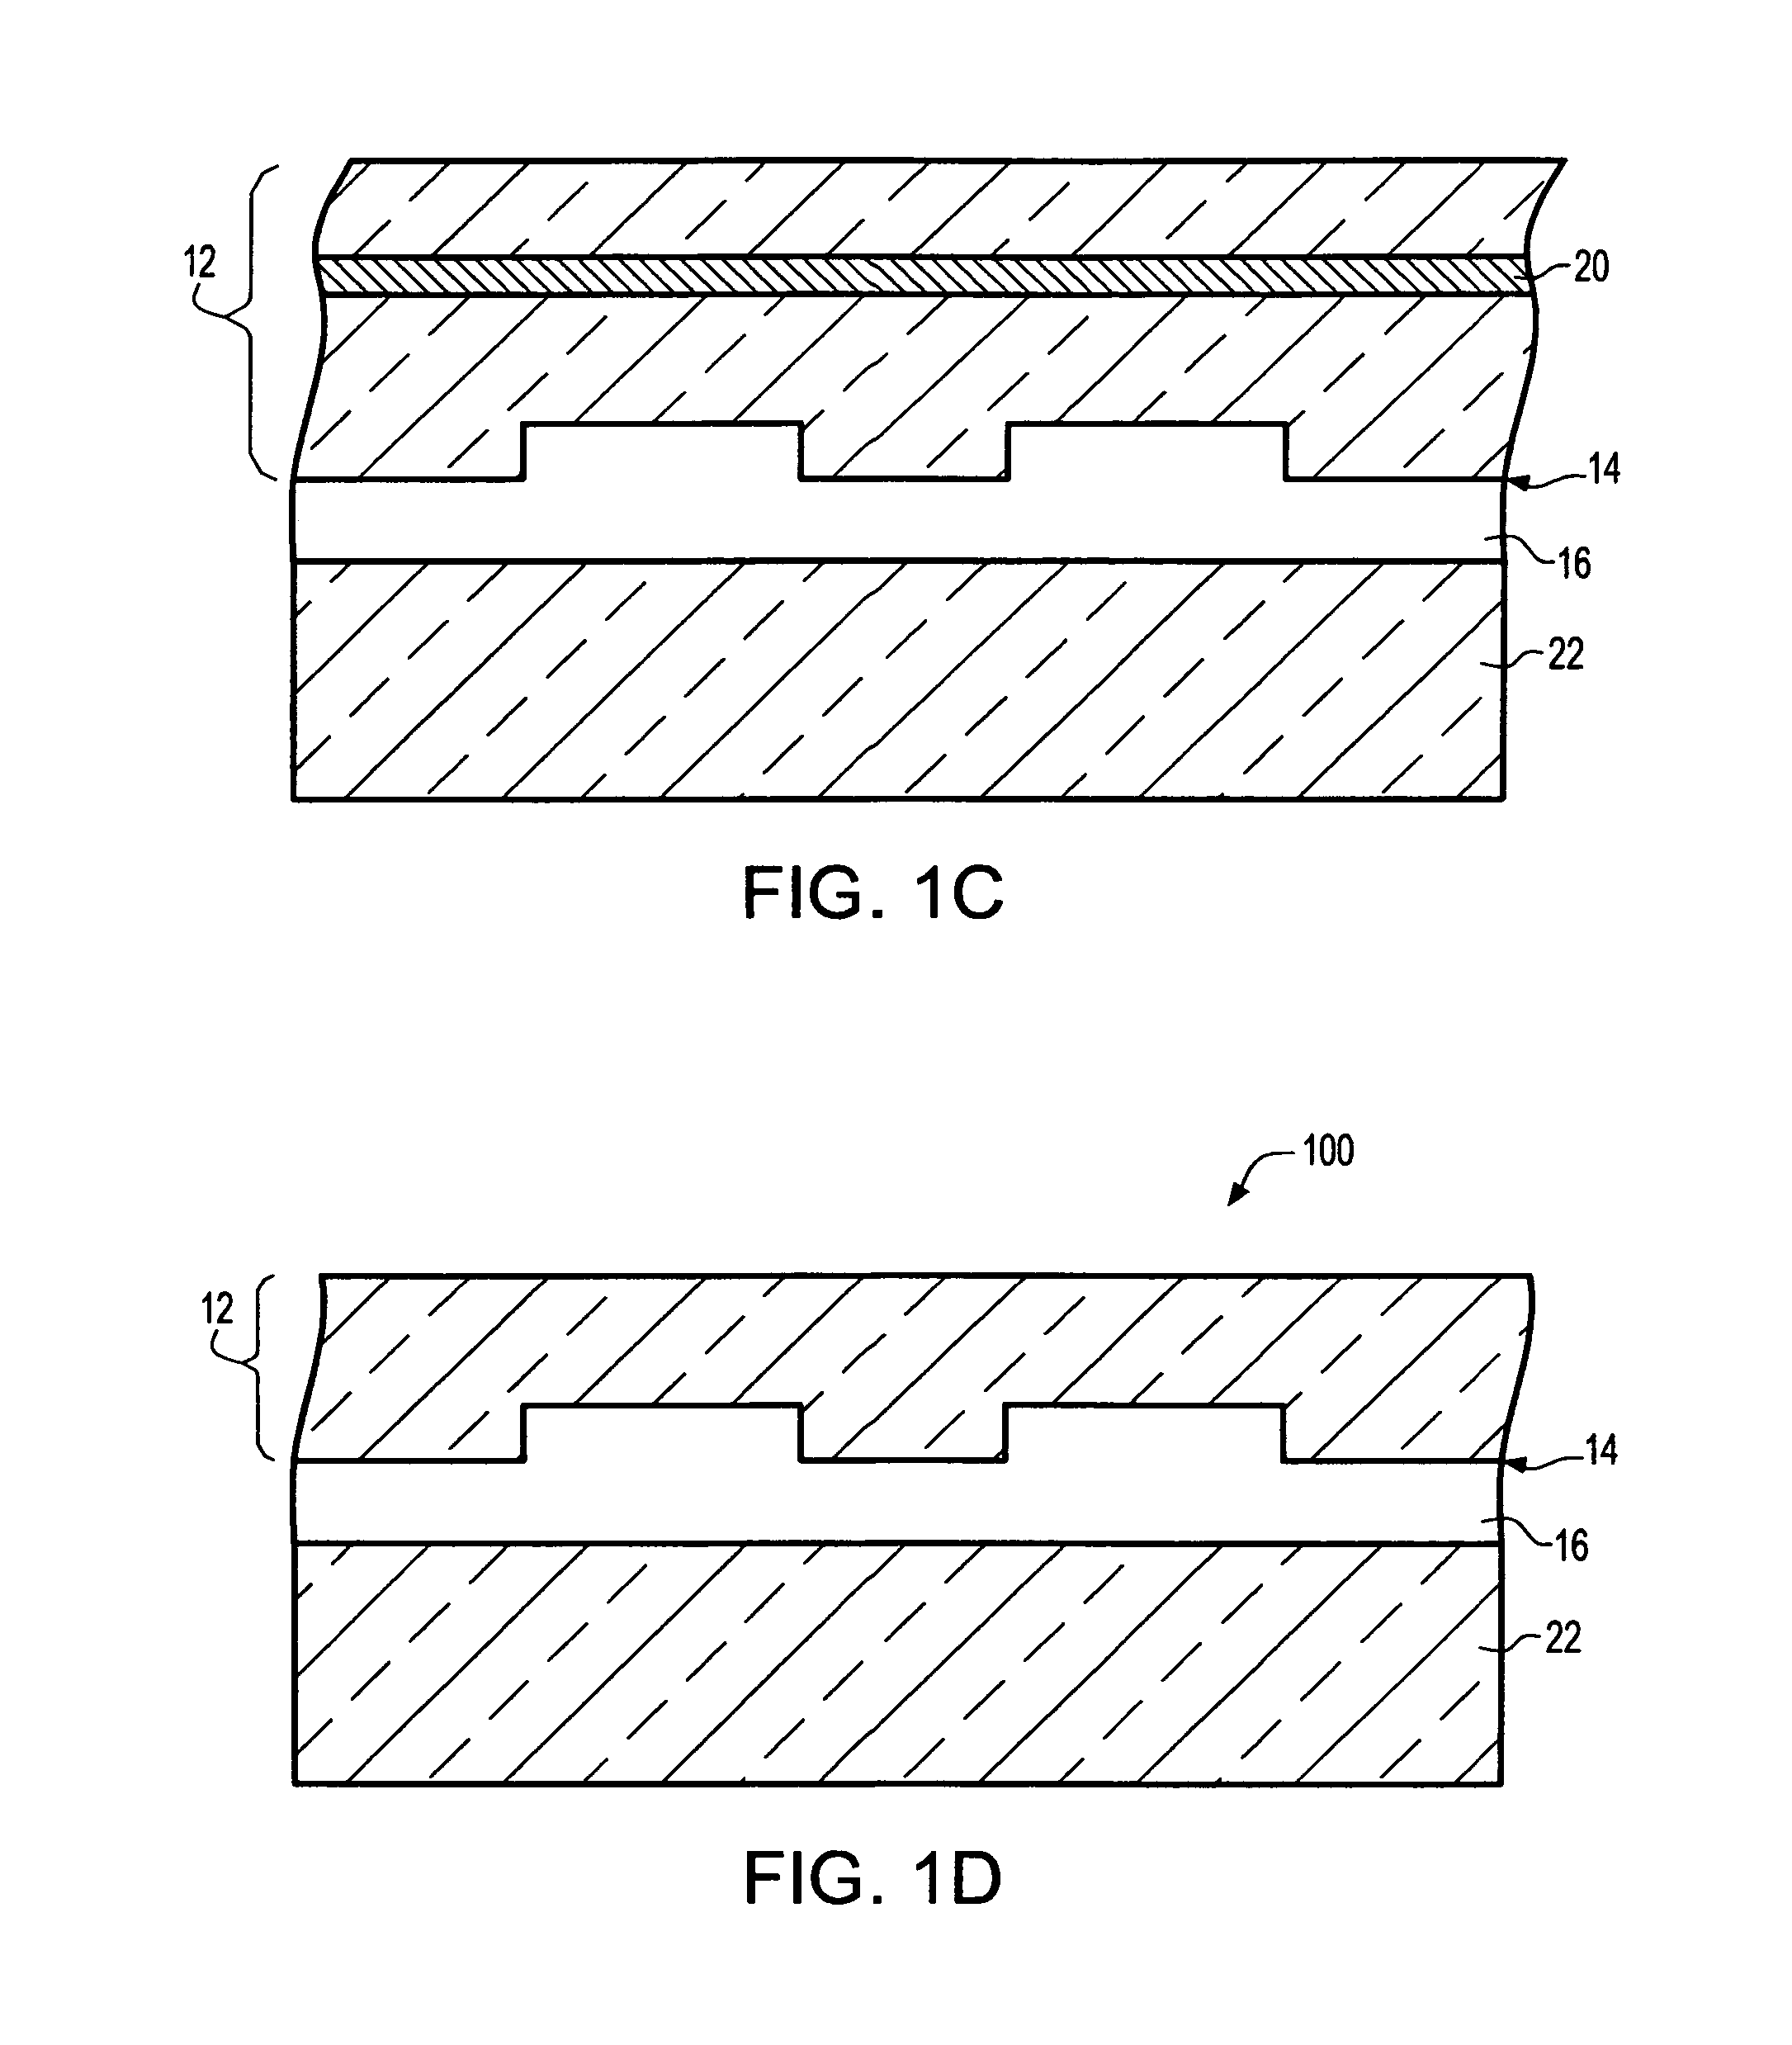 High performance field effect transistors on SOI substrate with stress-inducing material as buried insulator and methods